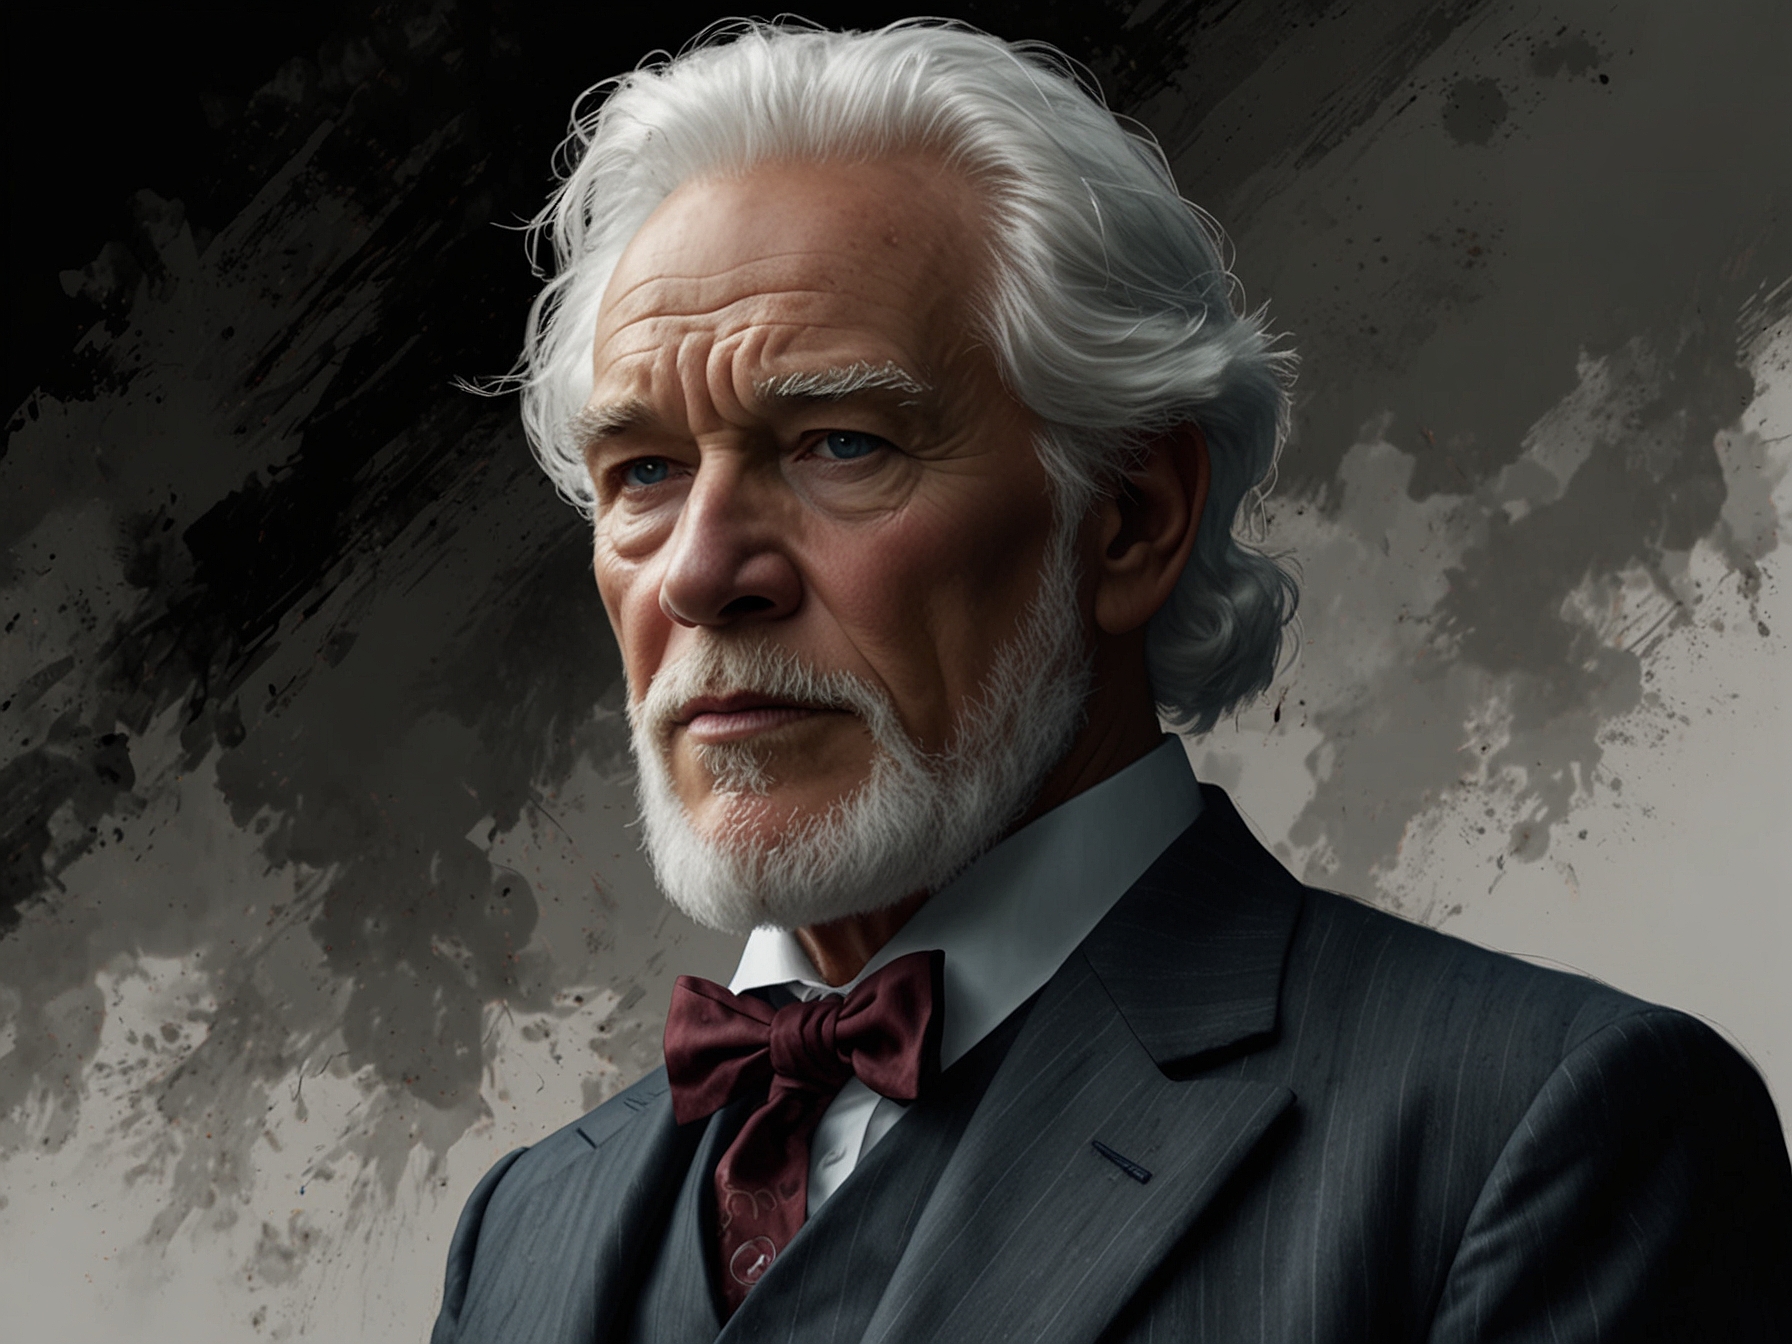 Sutherland as President Snow in 'The Hunger Games,' exuding a chilling yet charismatic presence, providing a formidable antagonist to Jennifer Lawrence's Katniss Everdeen.